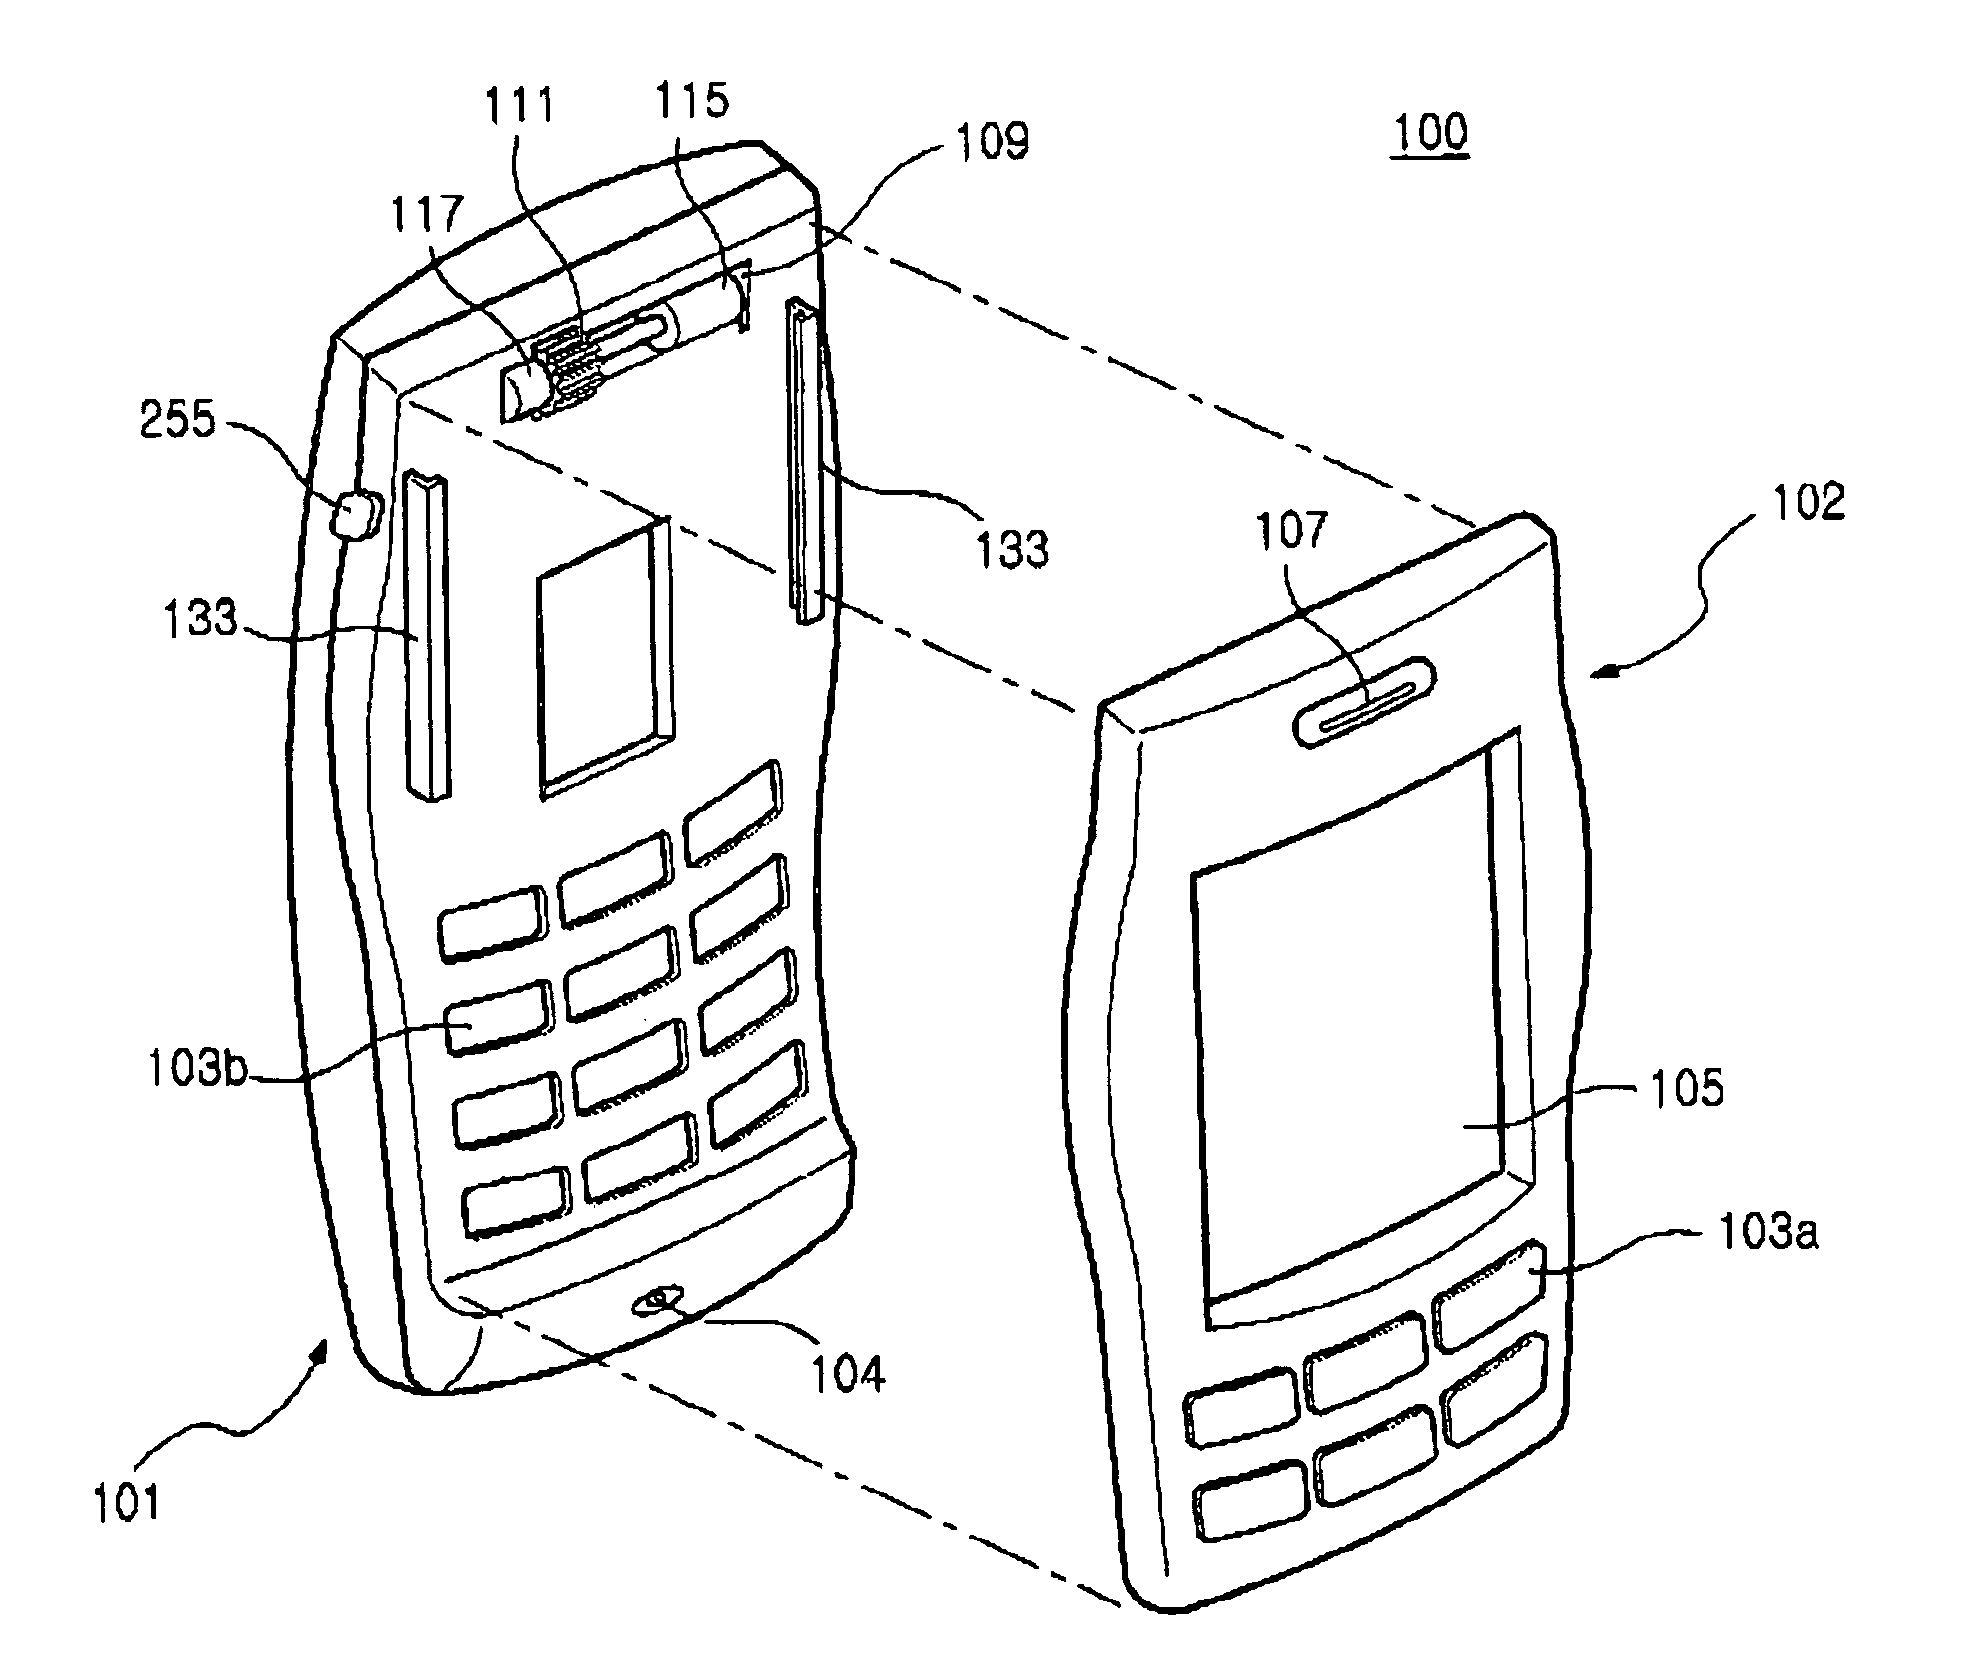 Sliding-type portable wireless terminal and method for controlling sliding movement in the same